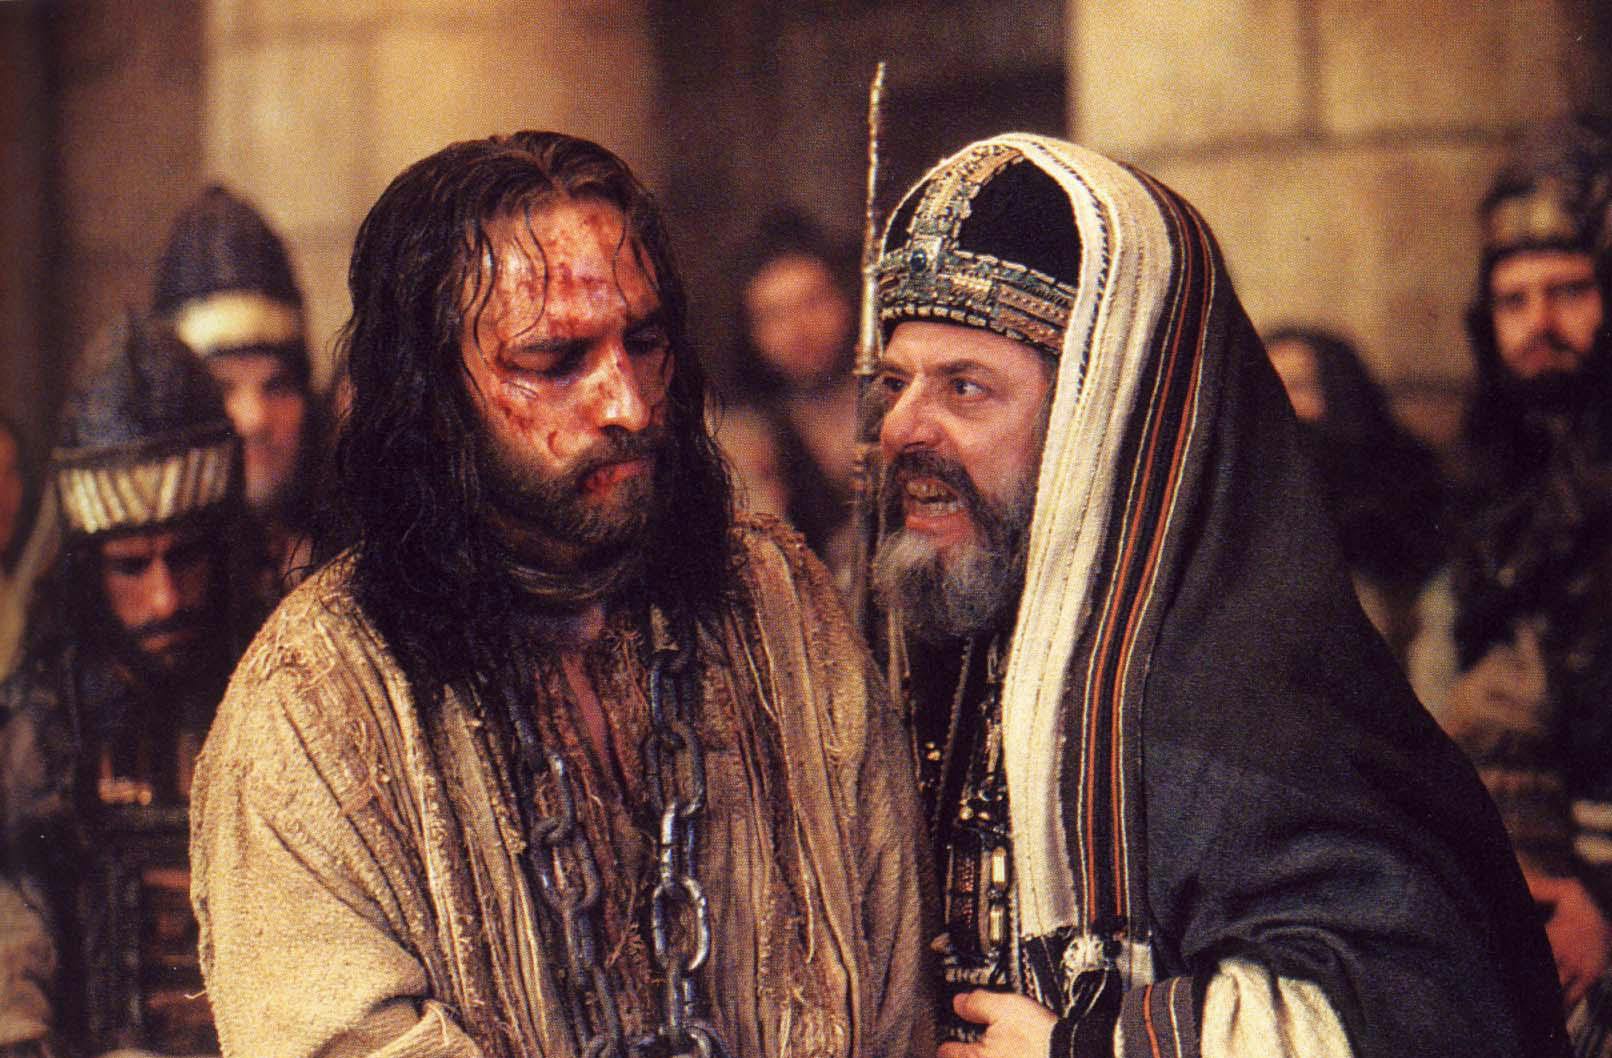 the passion of christ full movie english subtitles